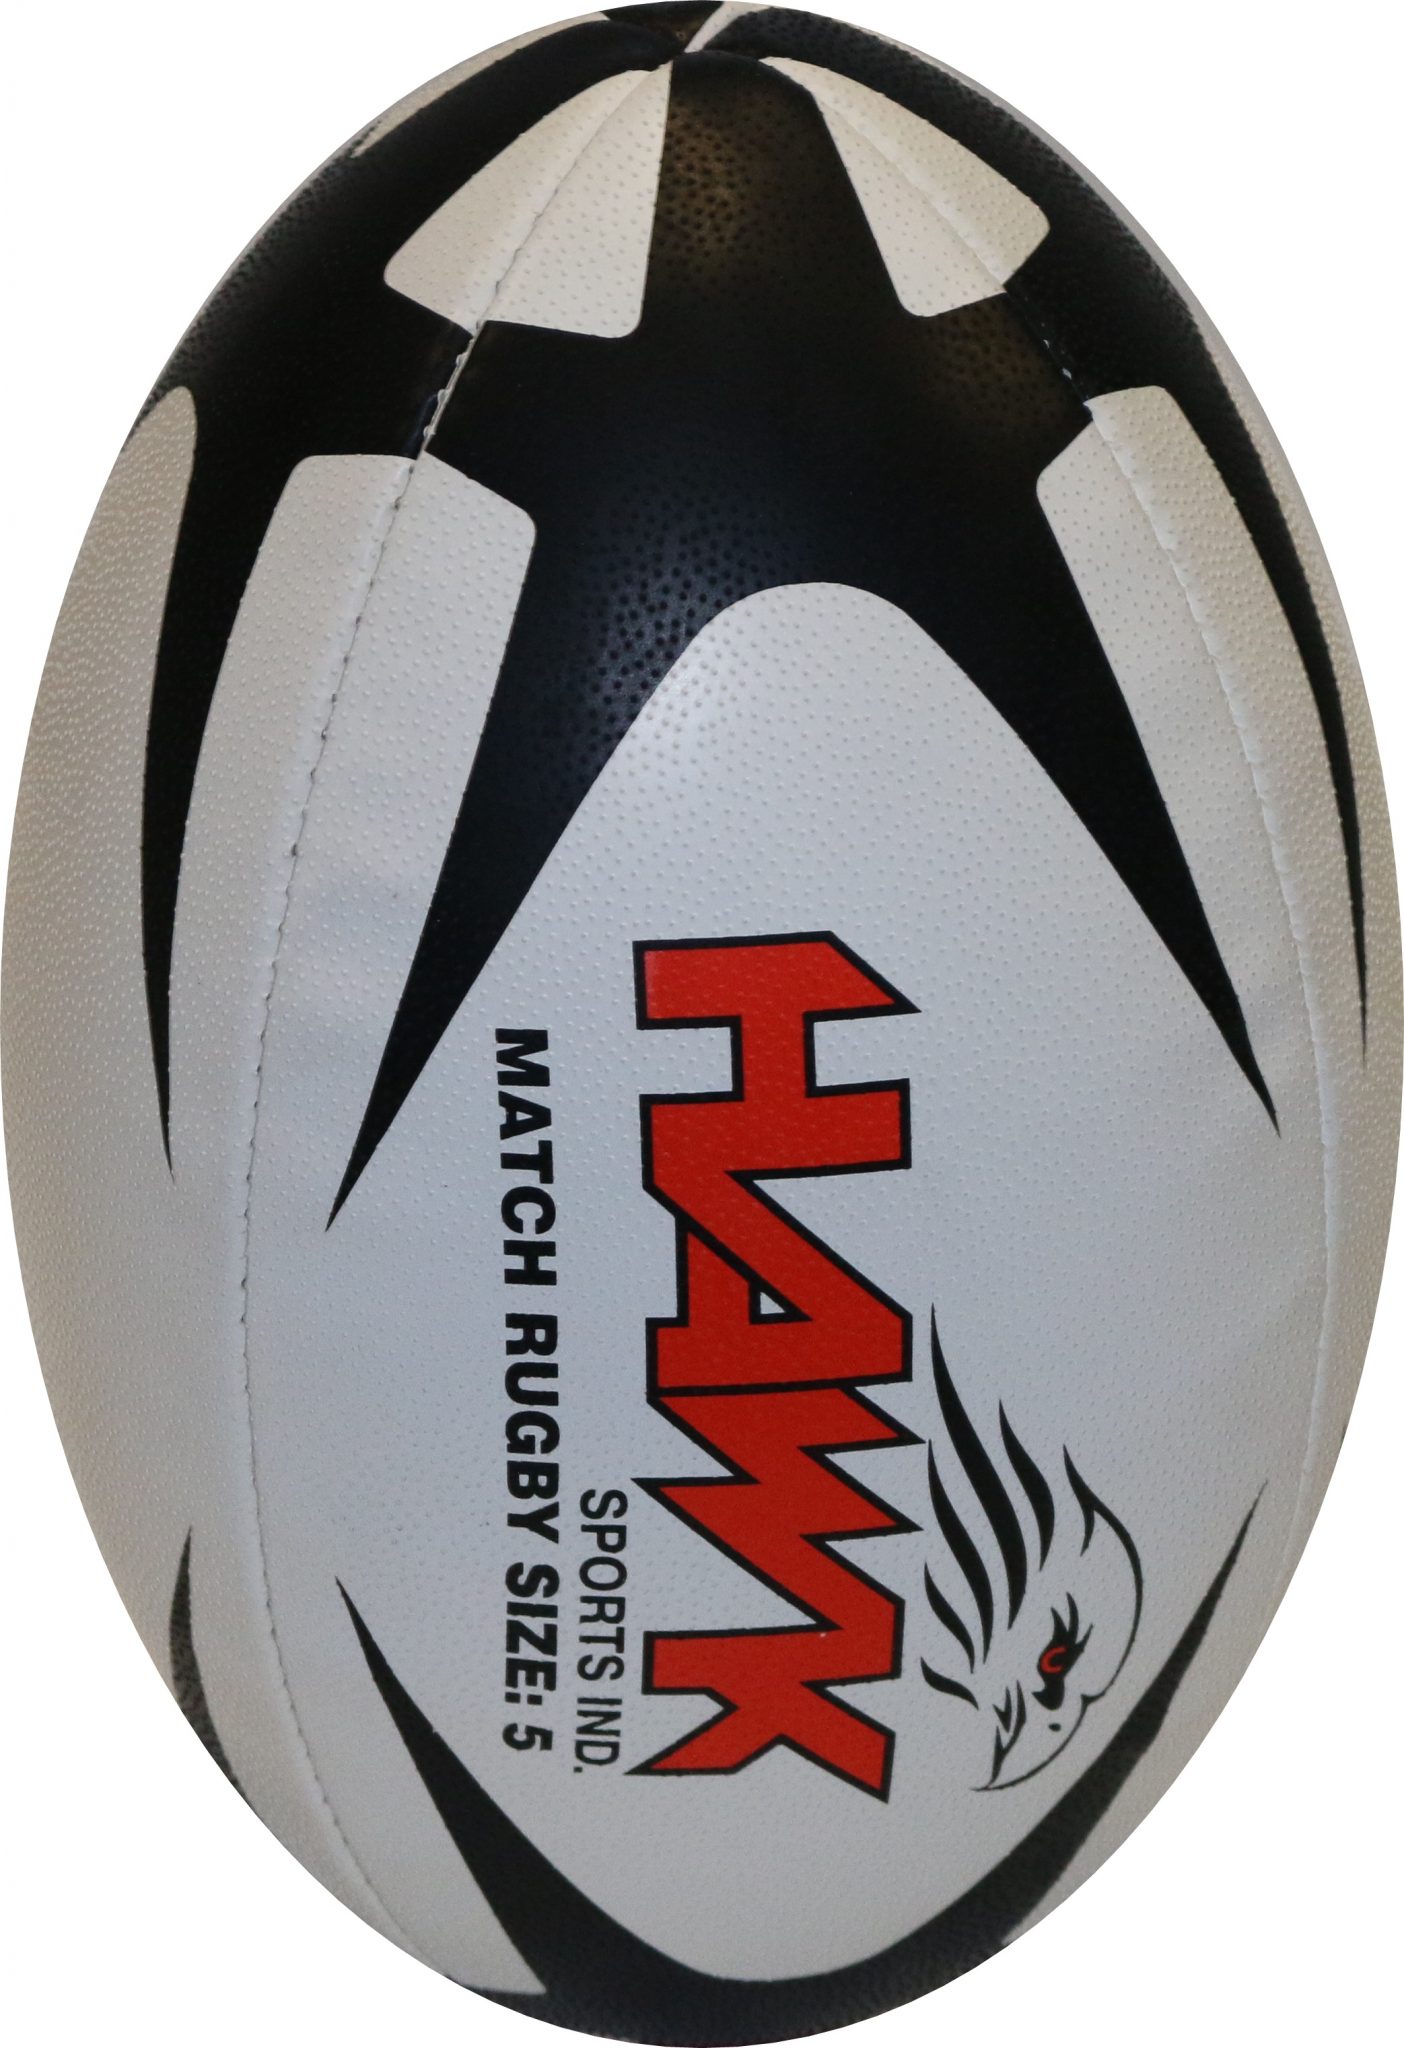 Heavy Duty & Durable Pro Impact Match Rugby Ball Professional Grade Ball Ideal for Long Matches & Gameplay Size 5 Assorted Colors 